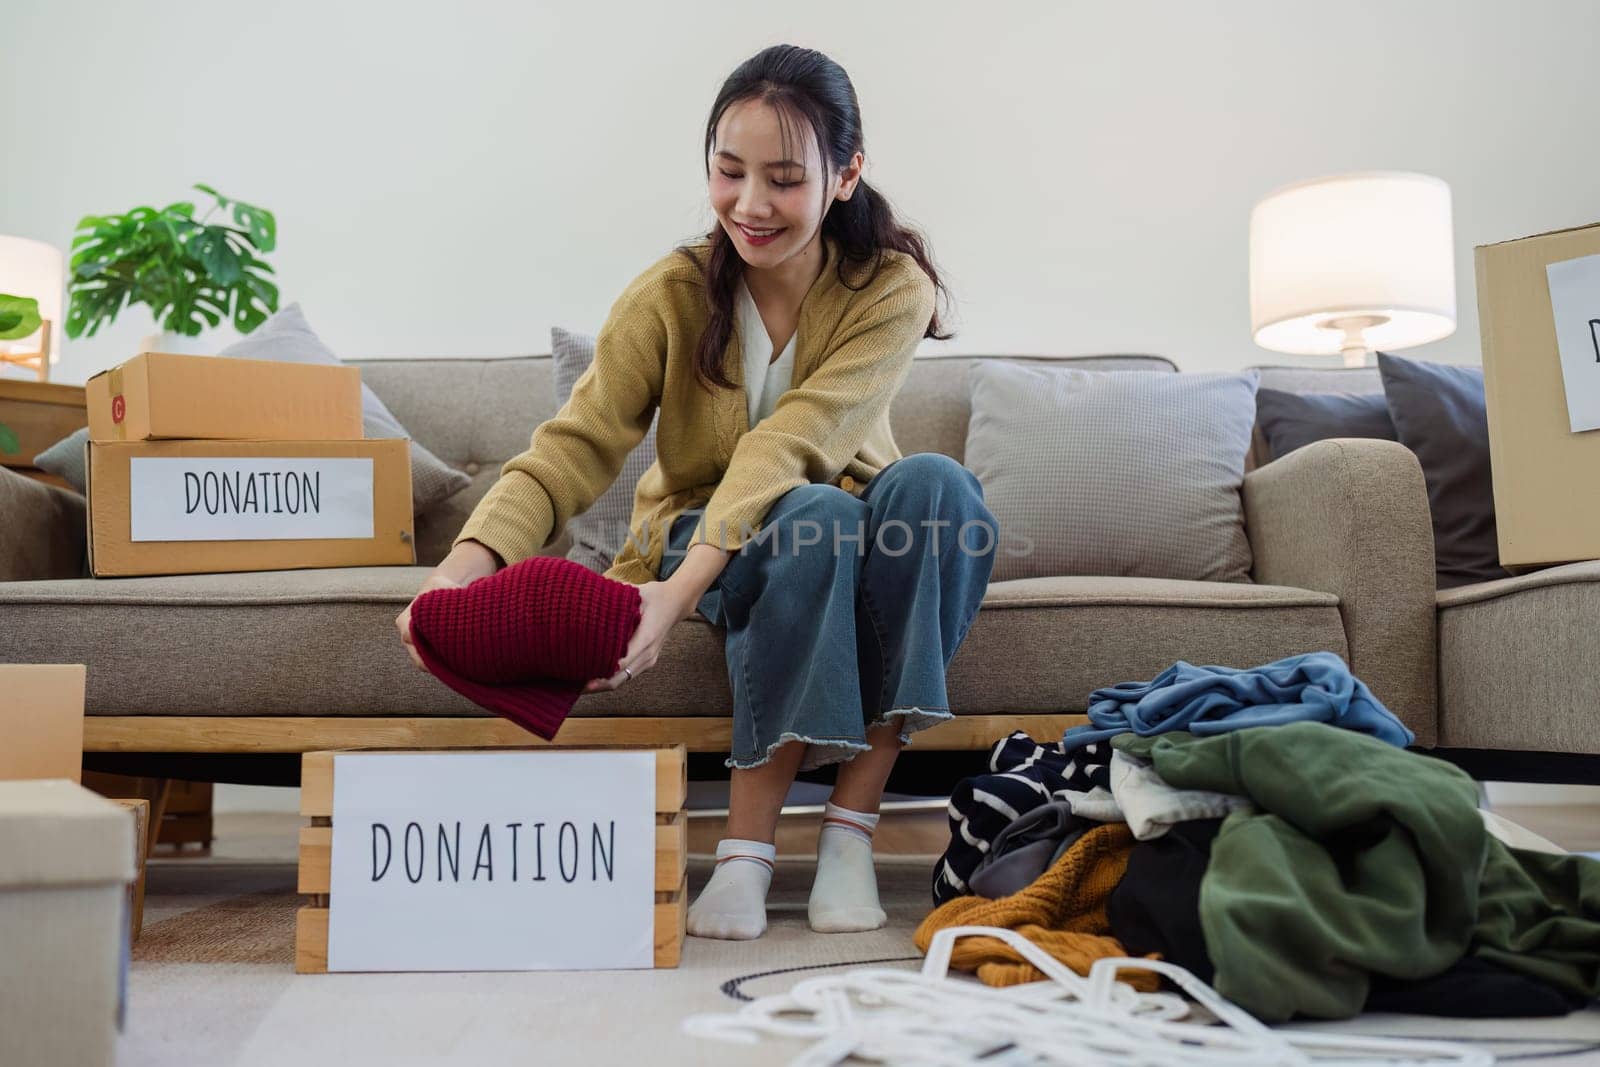 A woman is sorting through a pile of clothes and placing them in donation boxes. She is smiling as she works, indicating that she is happy to be helping others